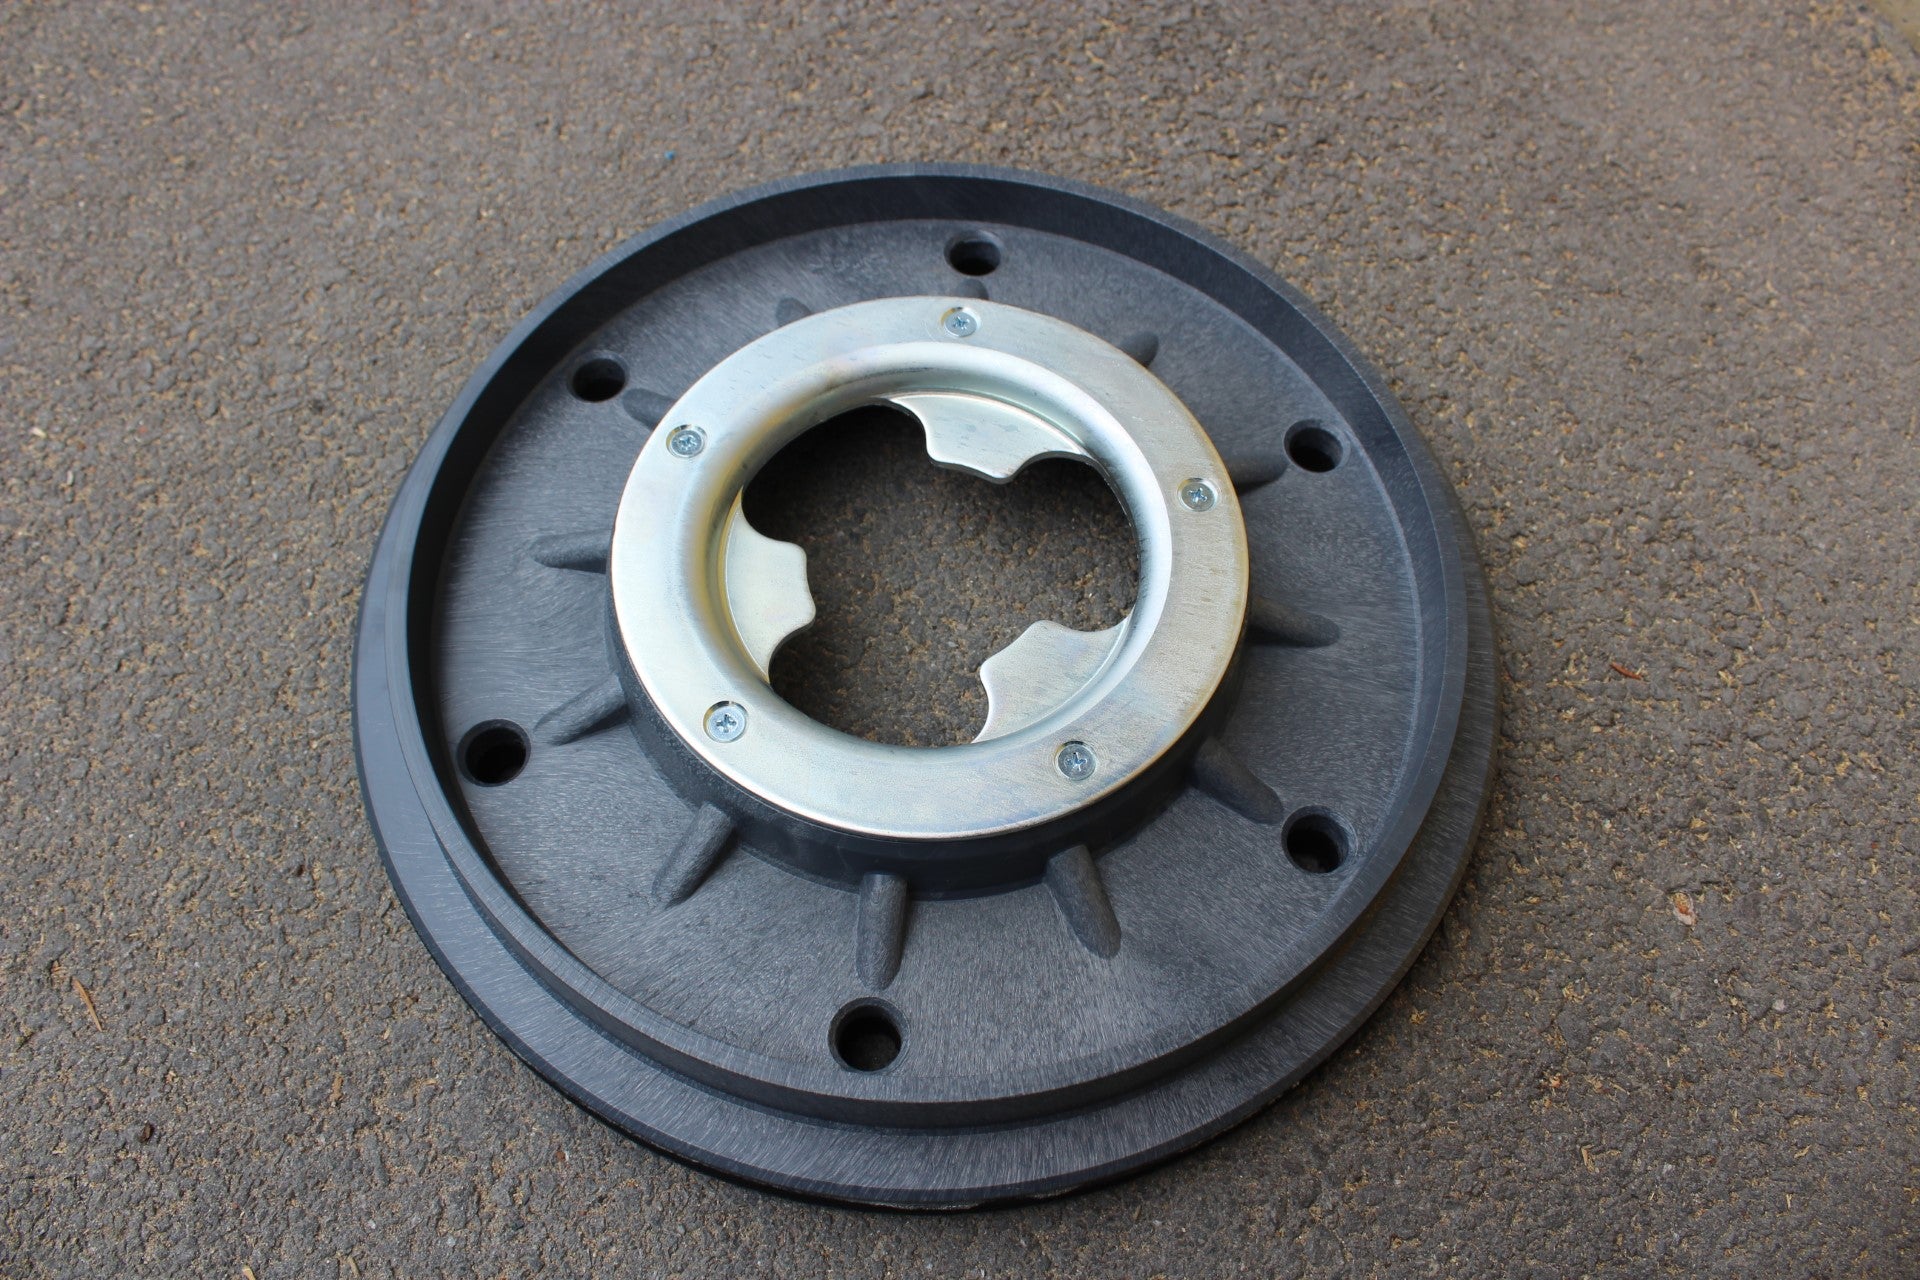 Prochem GH3152 13" Driveboard (For the L133 13" Rotary Machine)